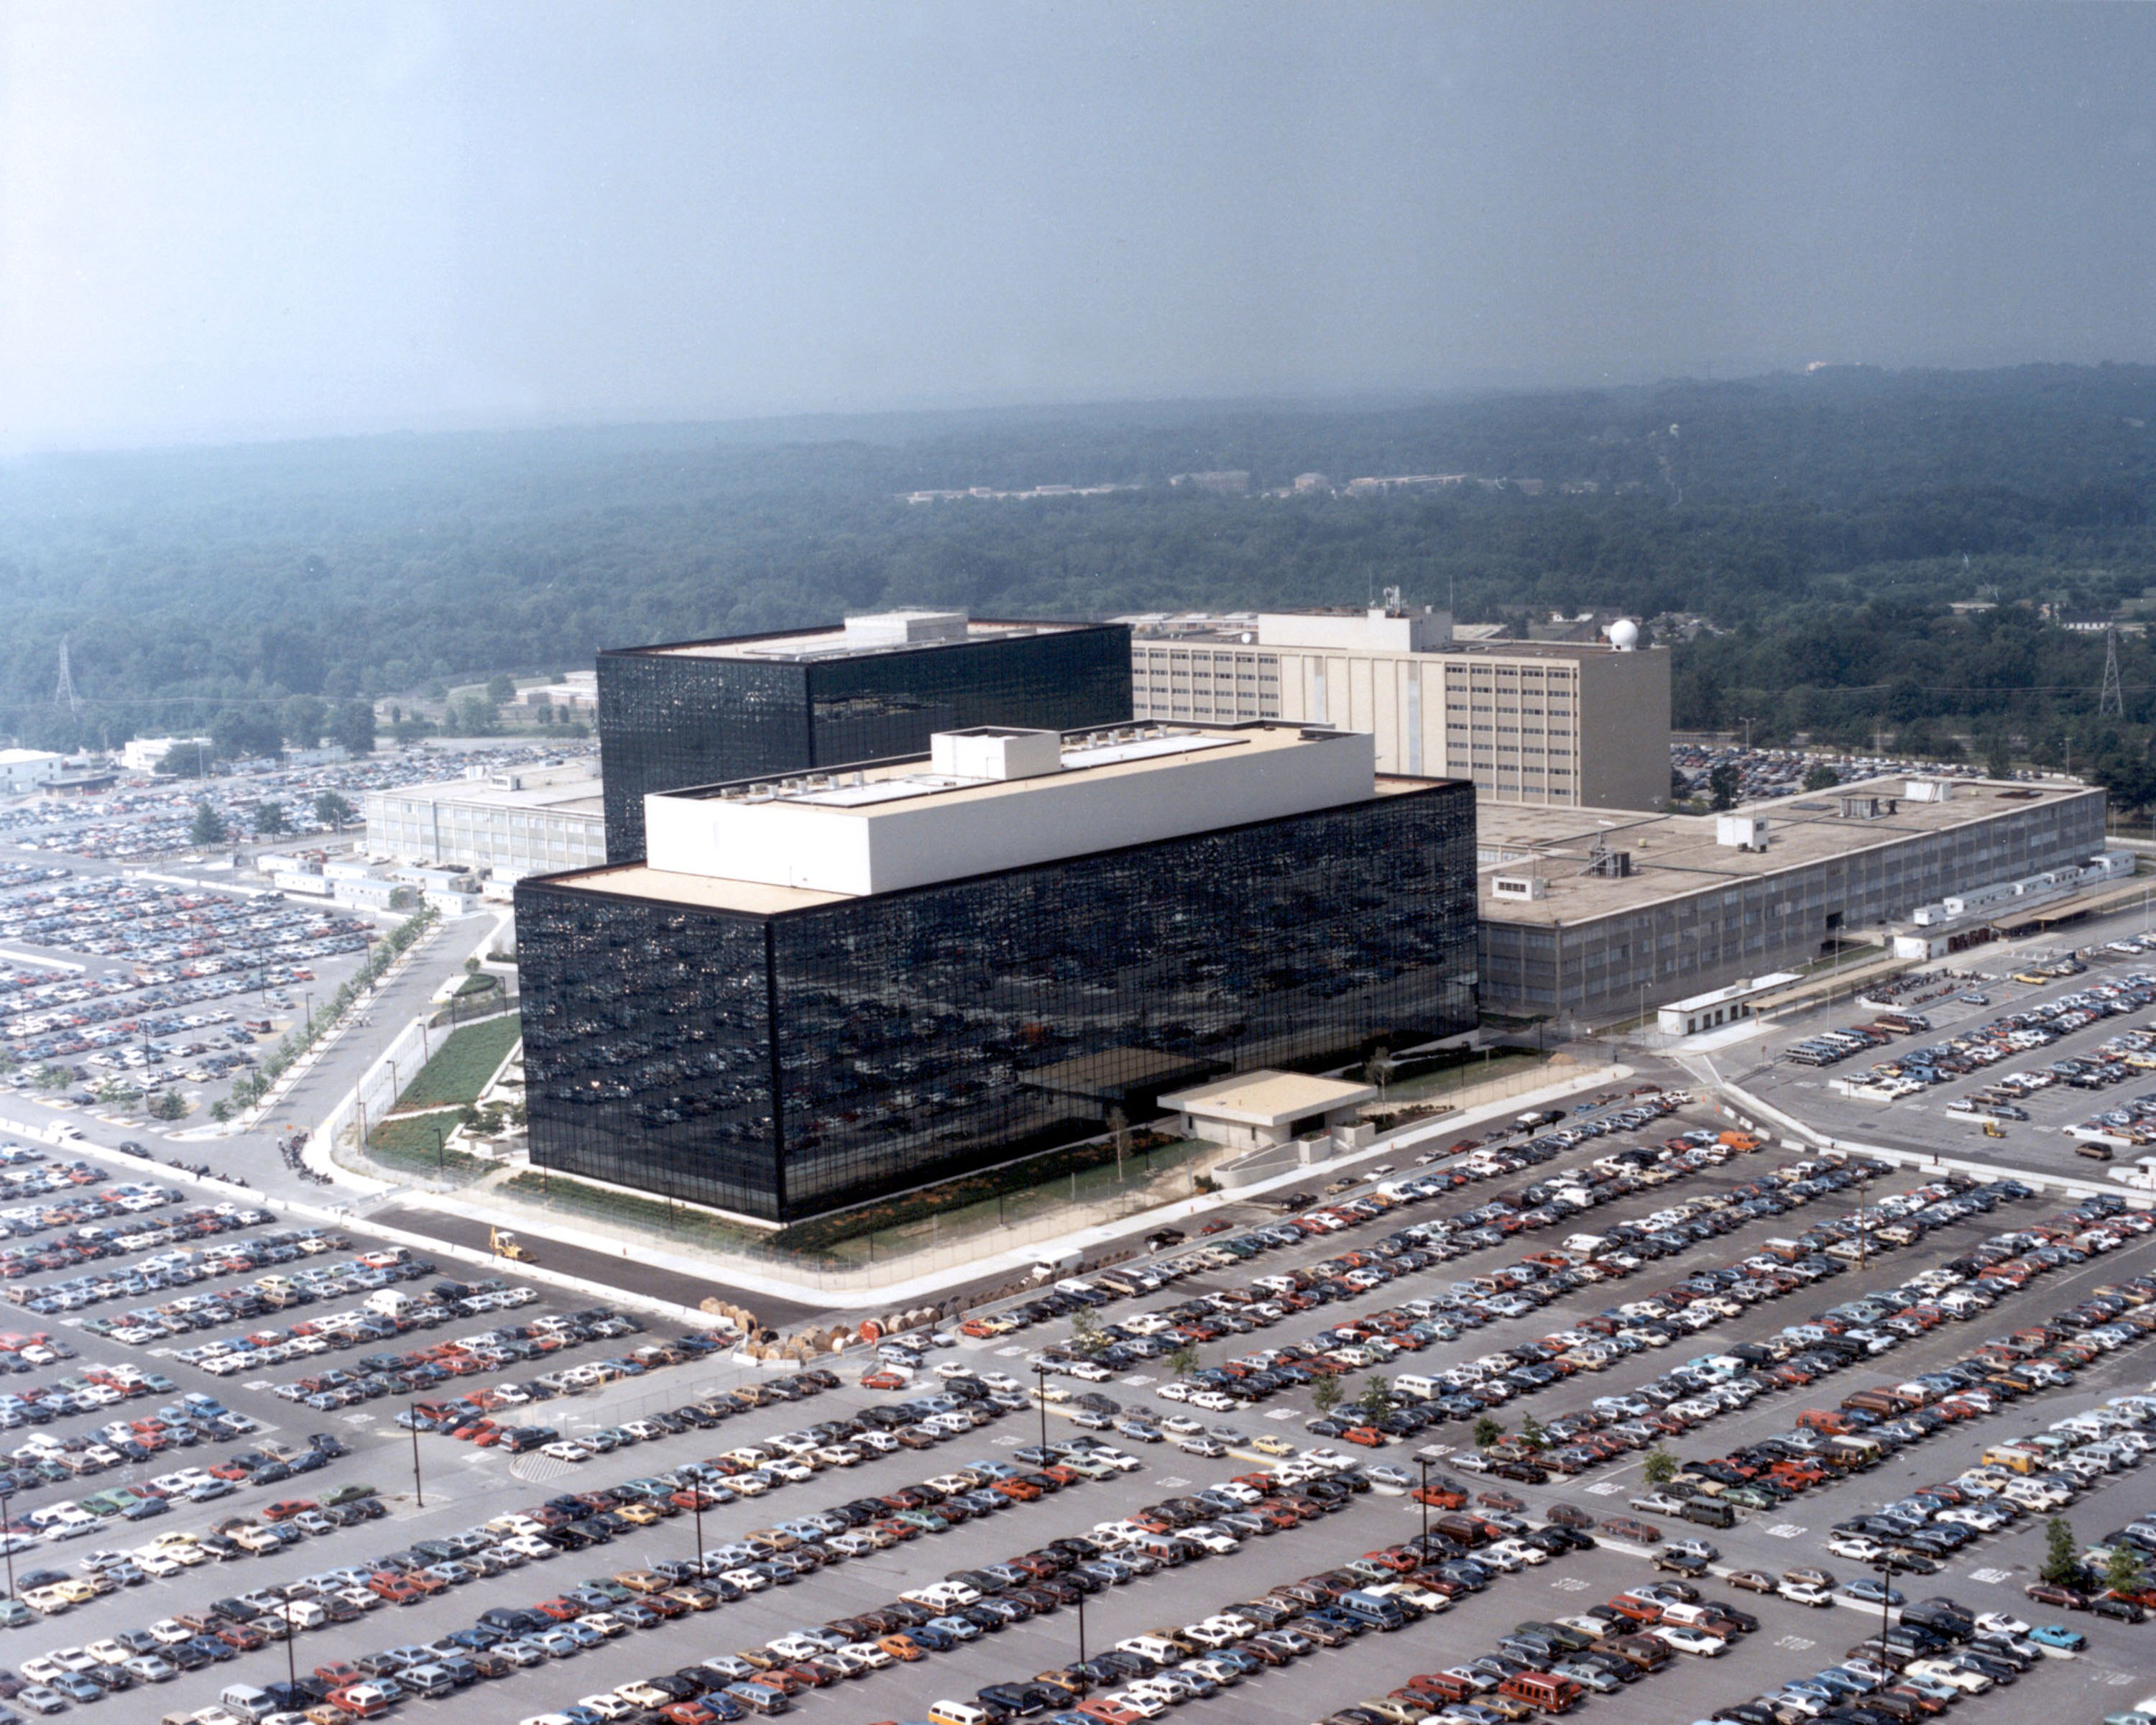 This undated photo provided by the National Security Agency (NSA) shows its headquarters in Fort Meade, Md.